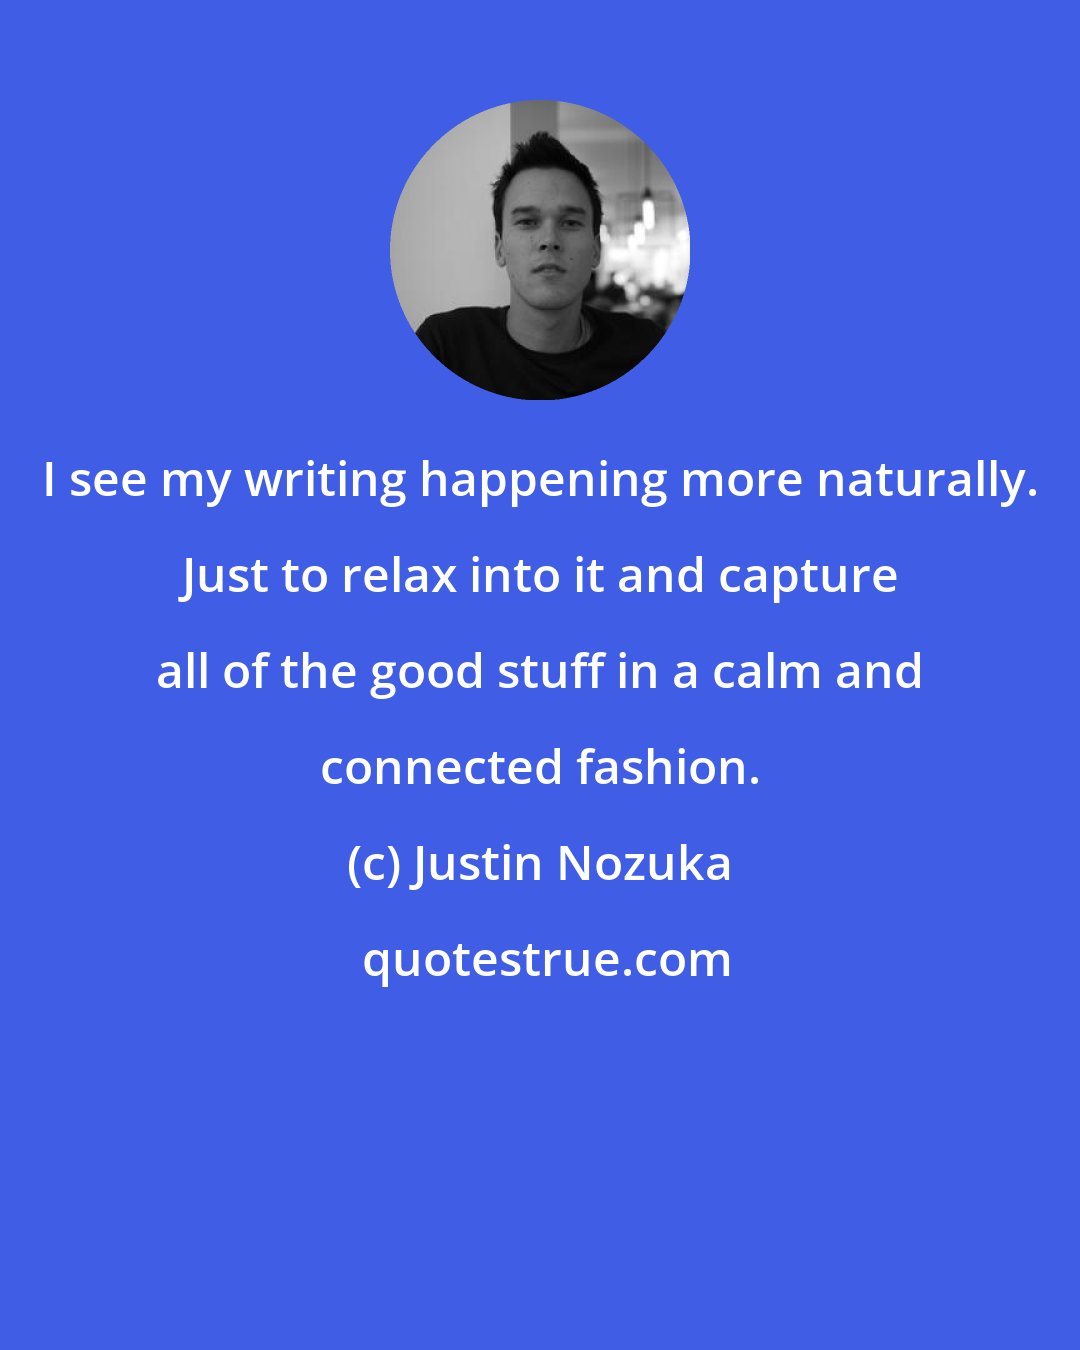 Justin Nozuka: I see my writing happening more naturally. Just to relax into it and capture all of the good stuff in a calm and connected fashion.